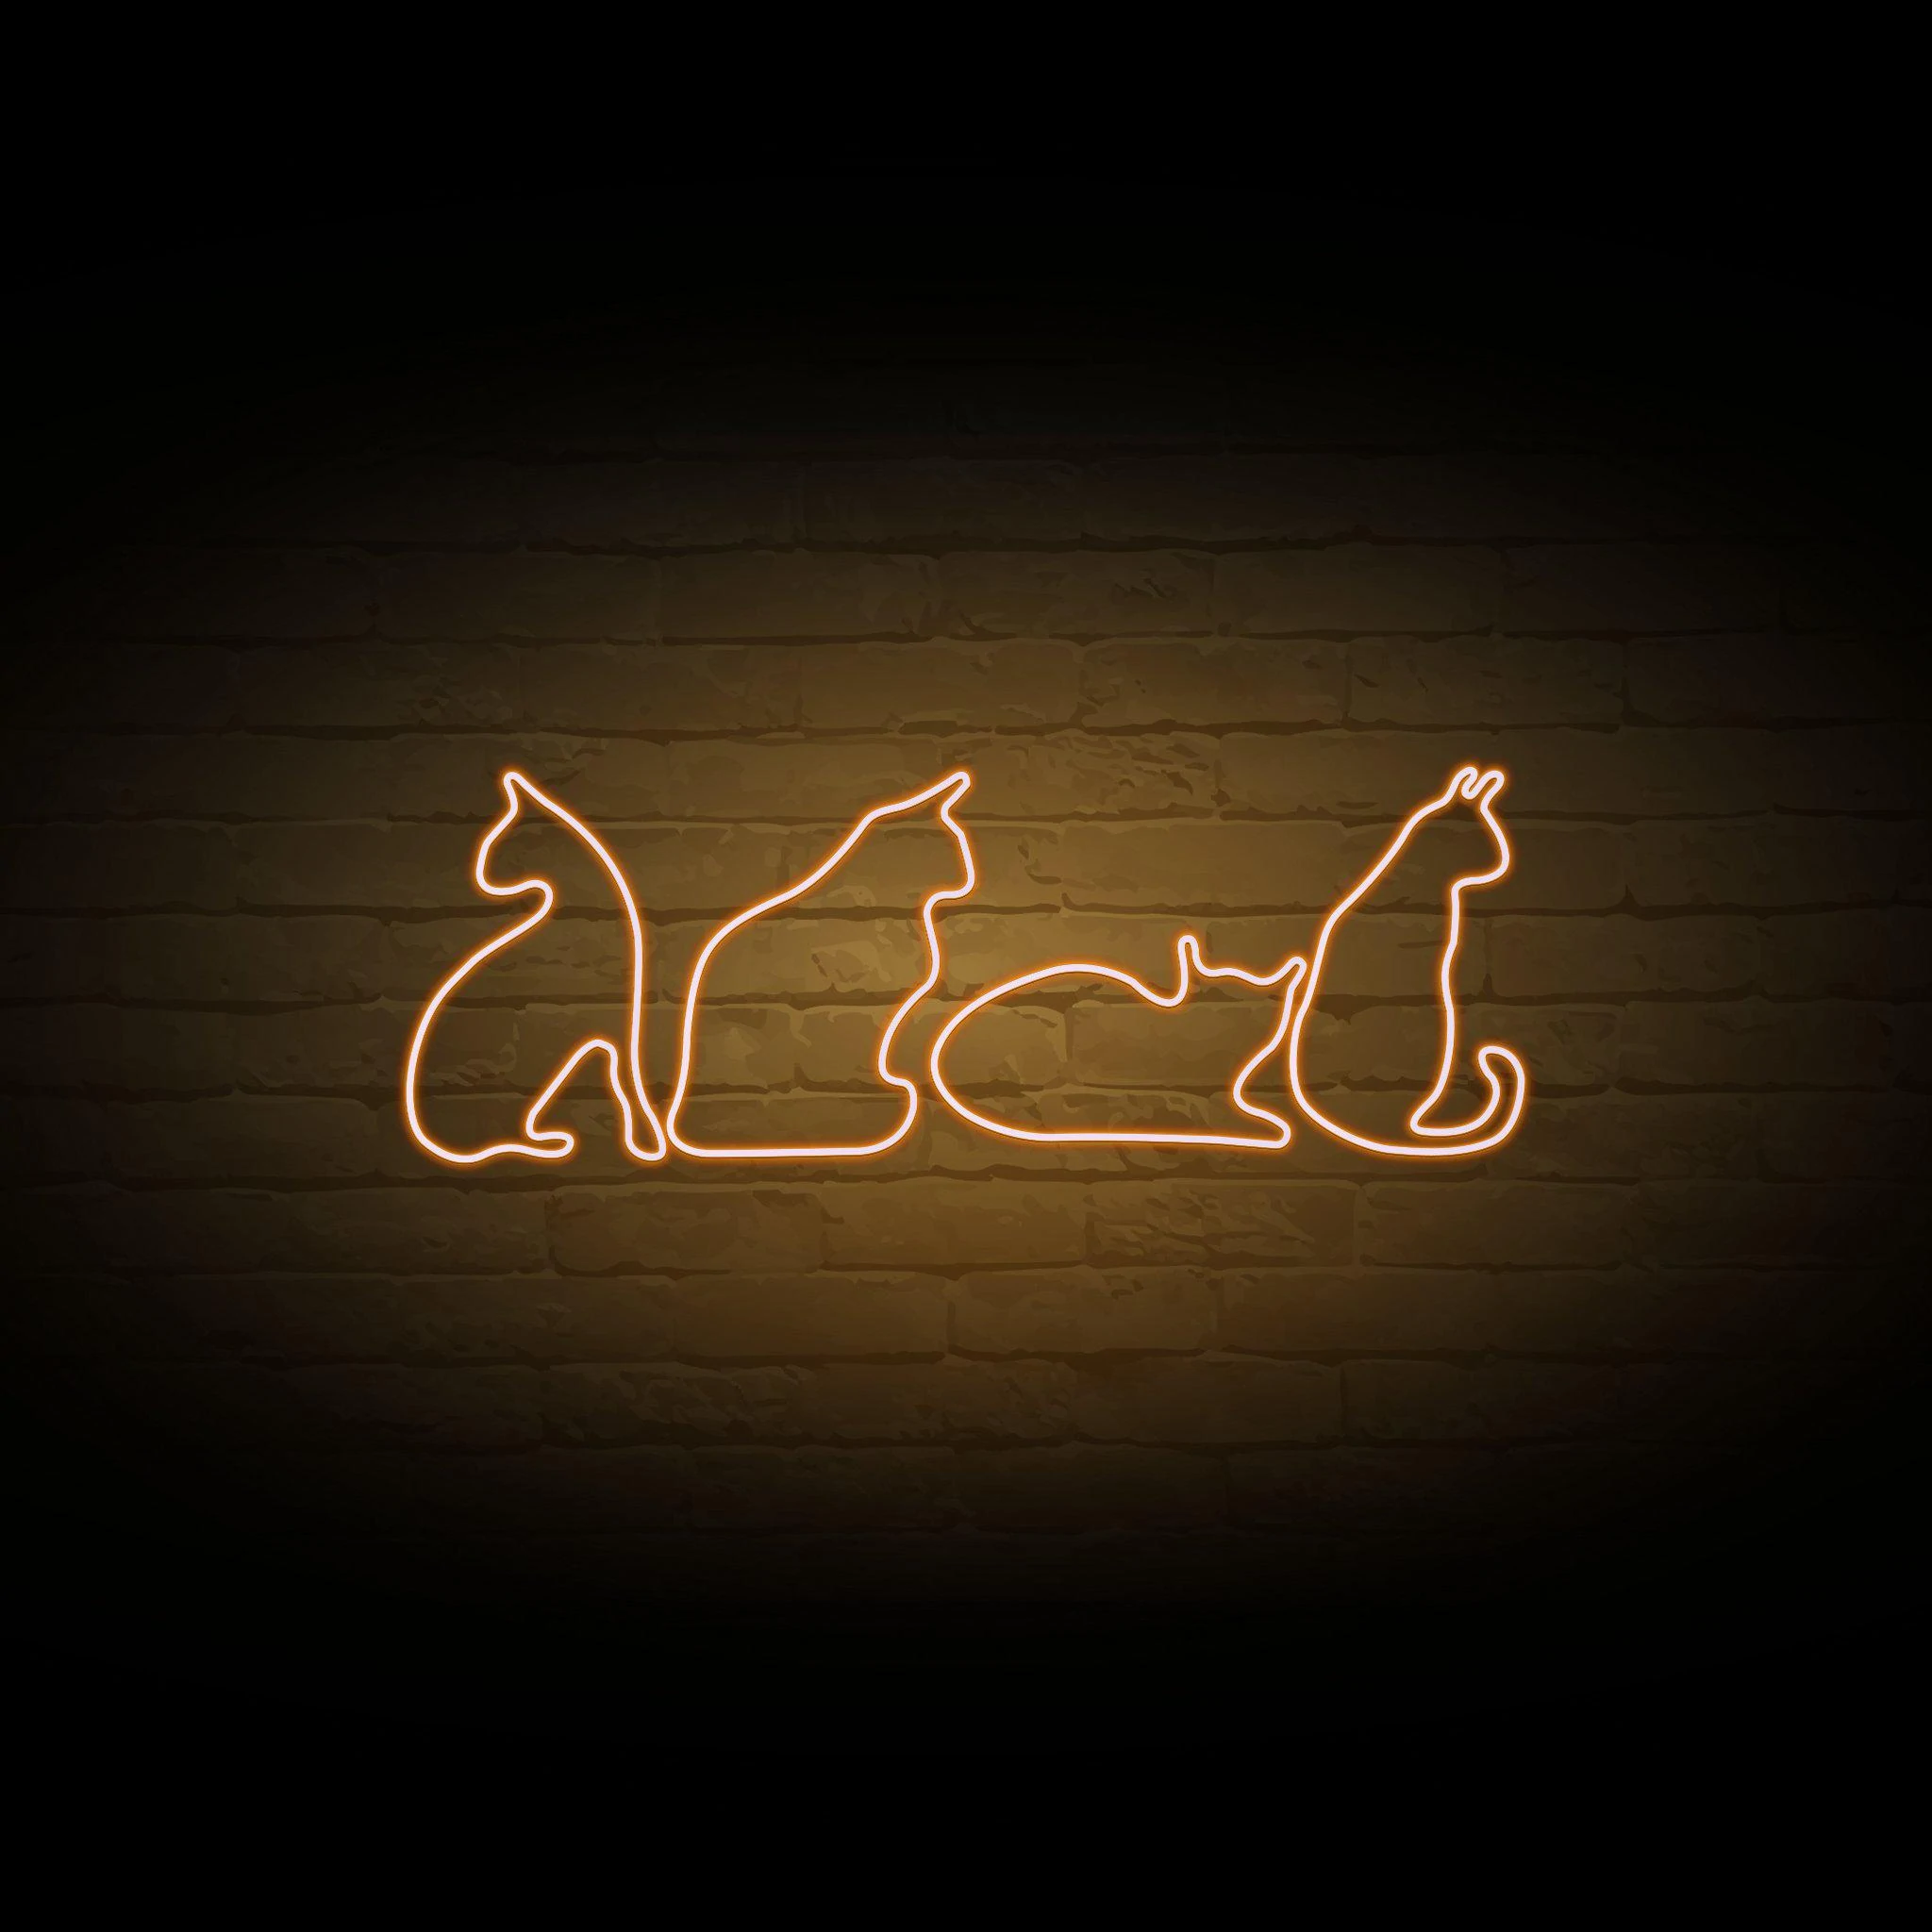 'CATS' NEON SIGN